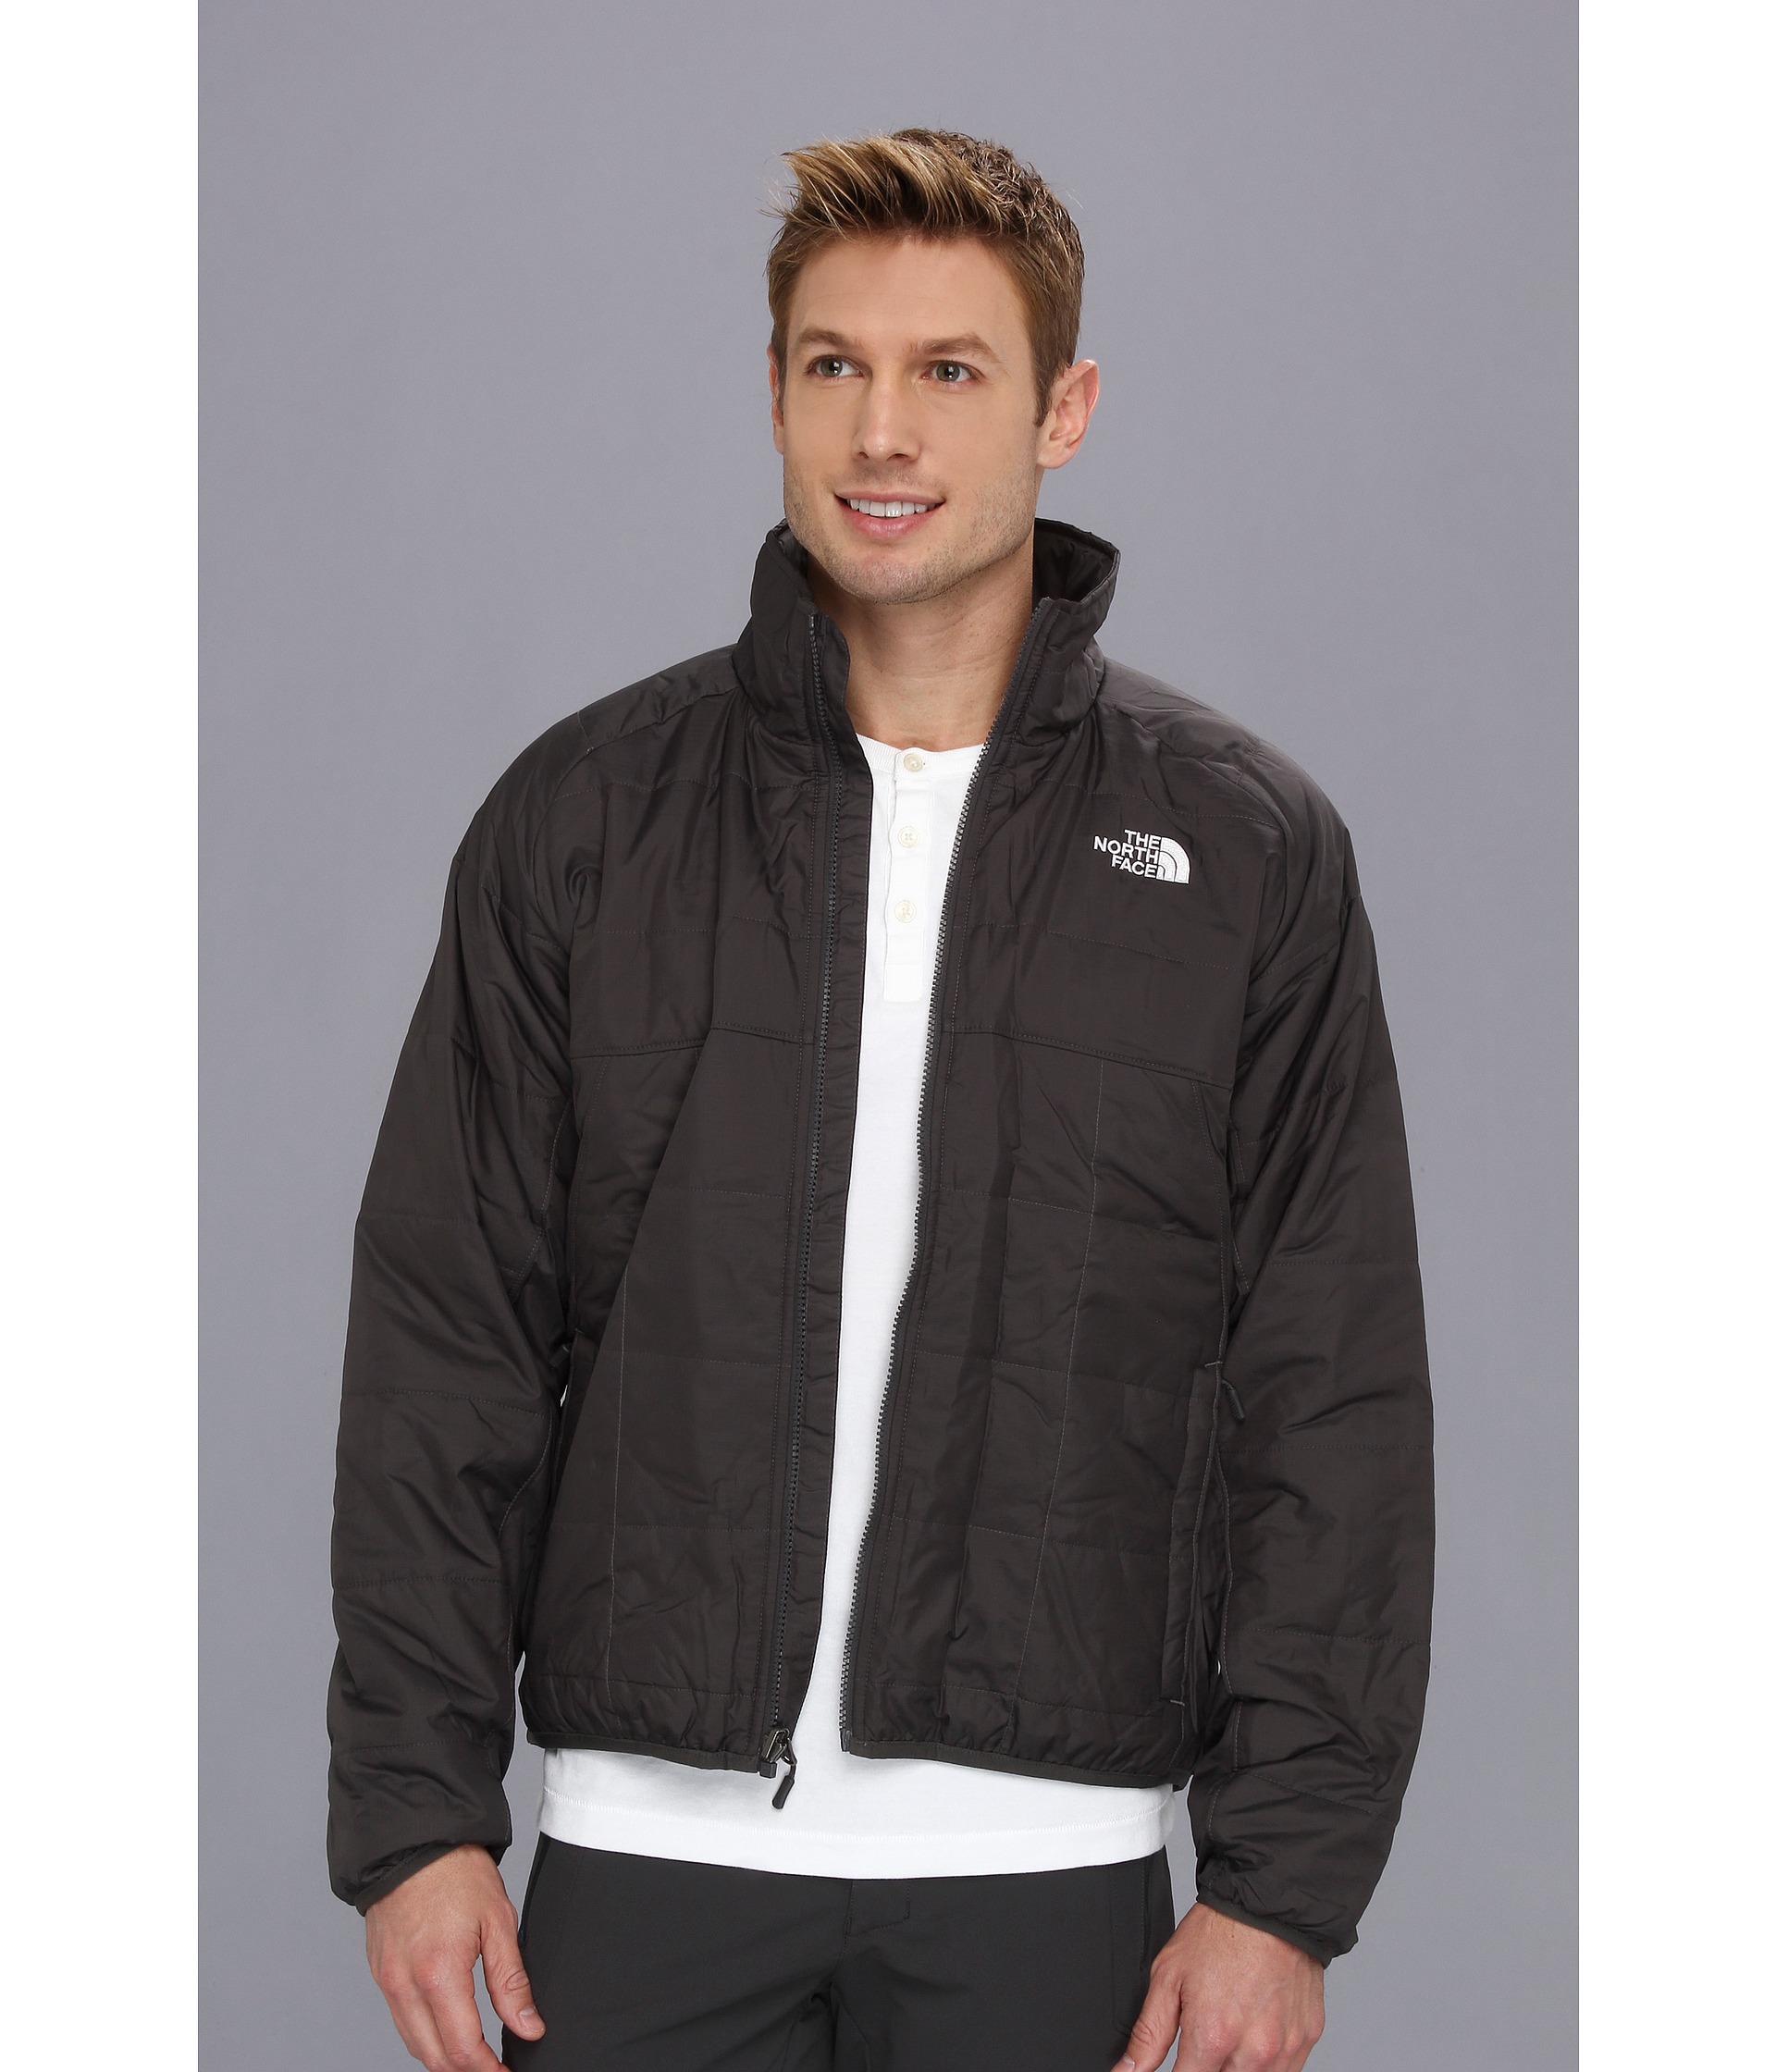 The North Face Vortex Triclimate Jacket | Shipped Free at Zappos